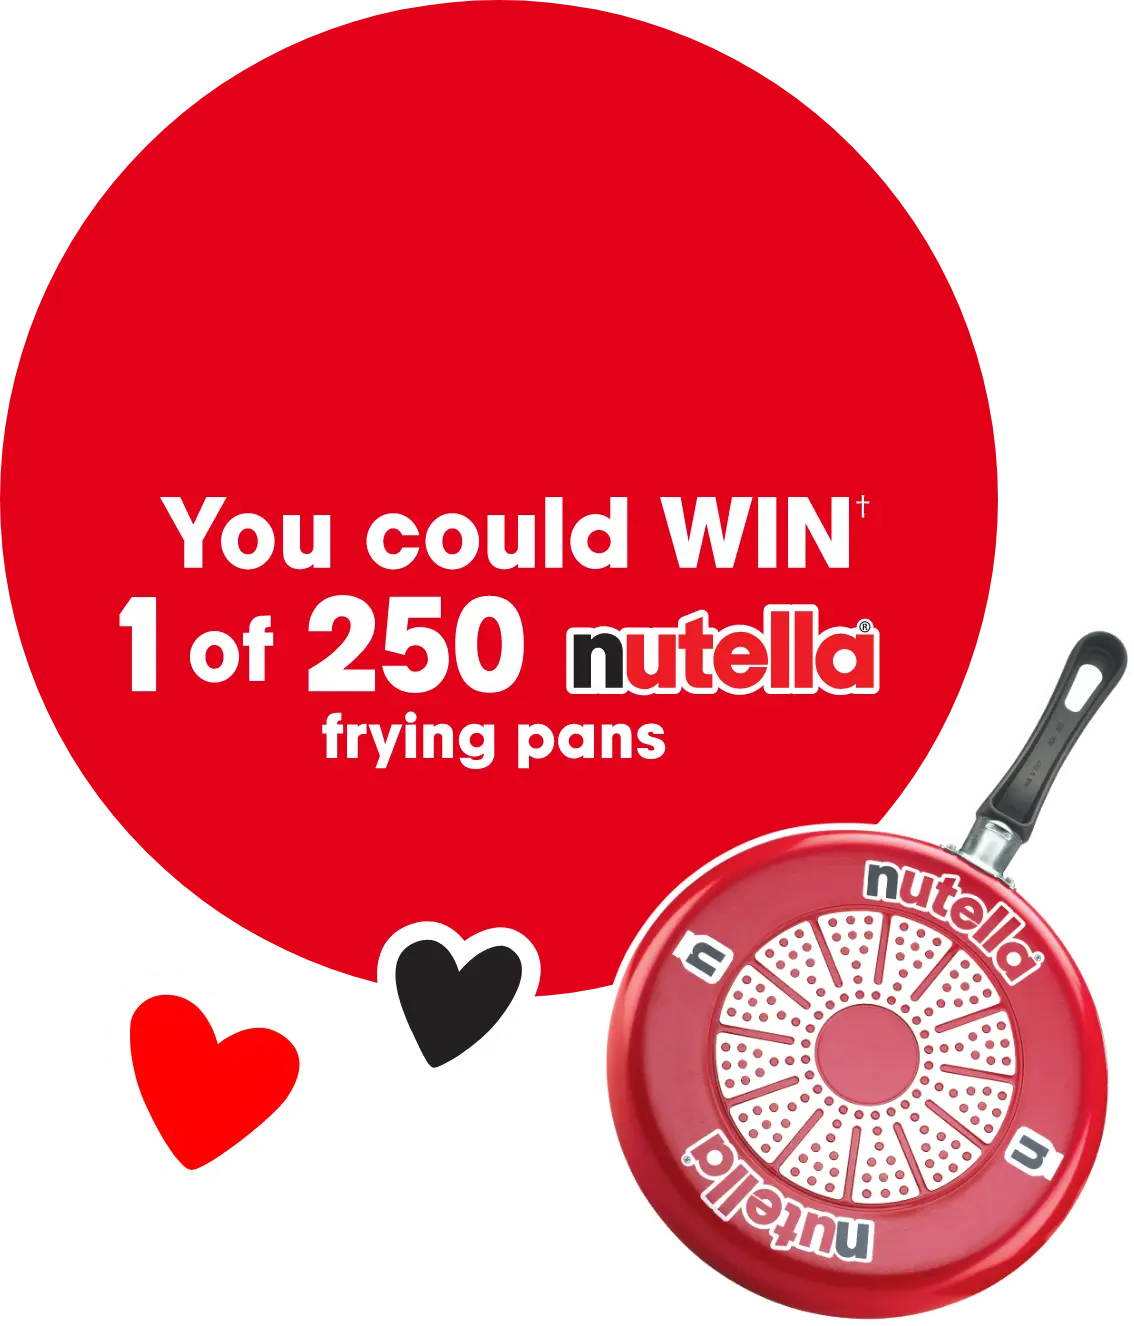 You could WIN 1 of 250 nutella frying pans